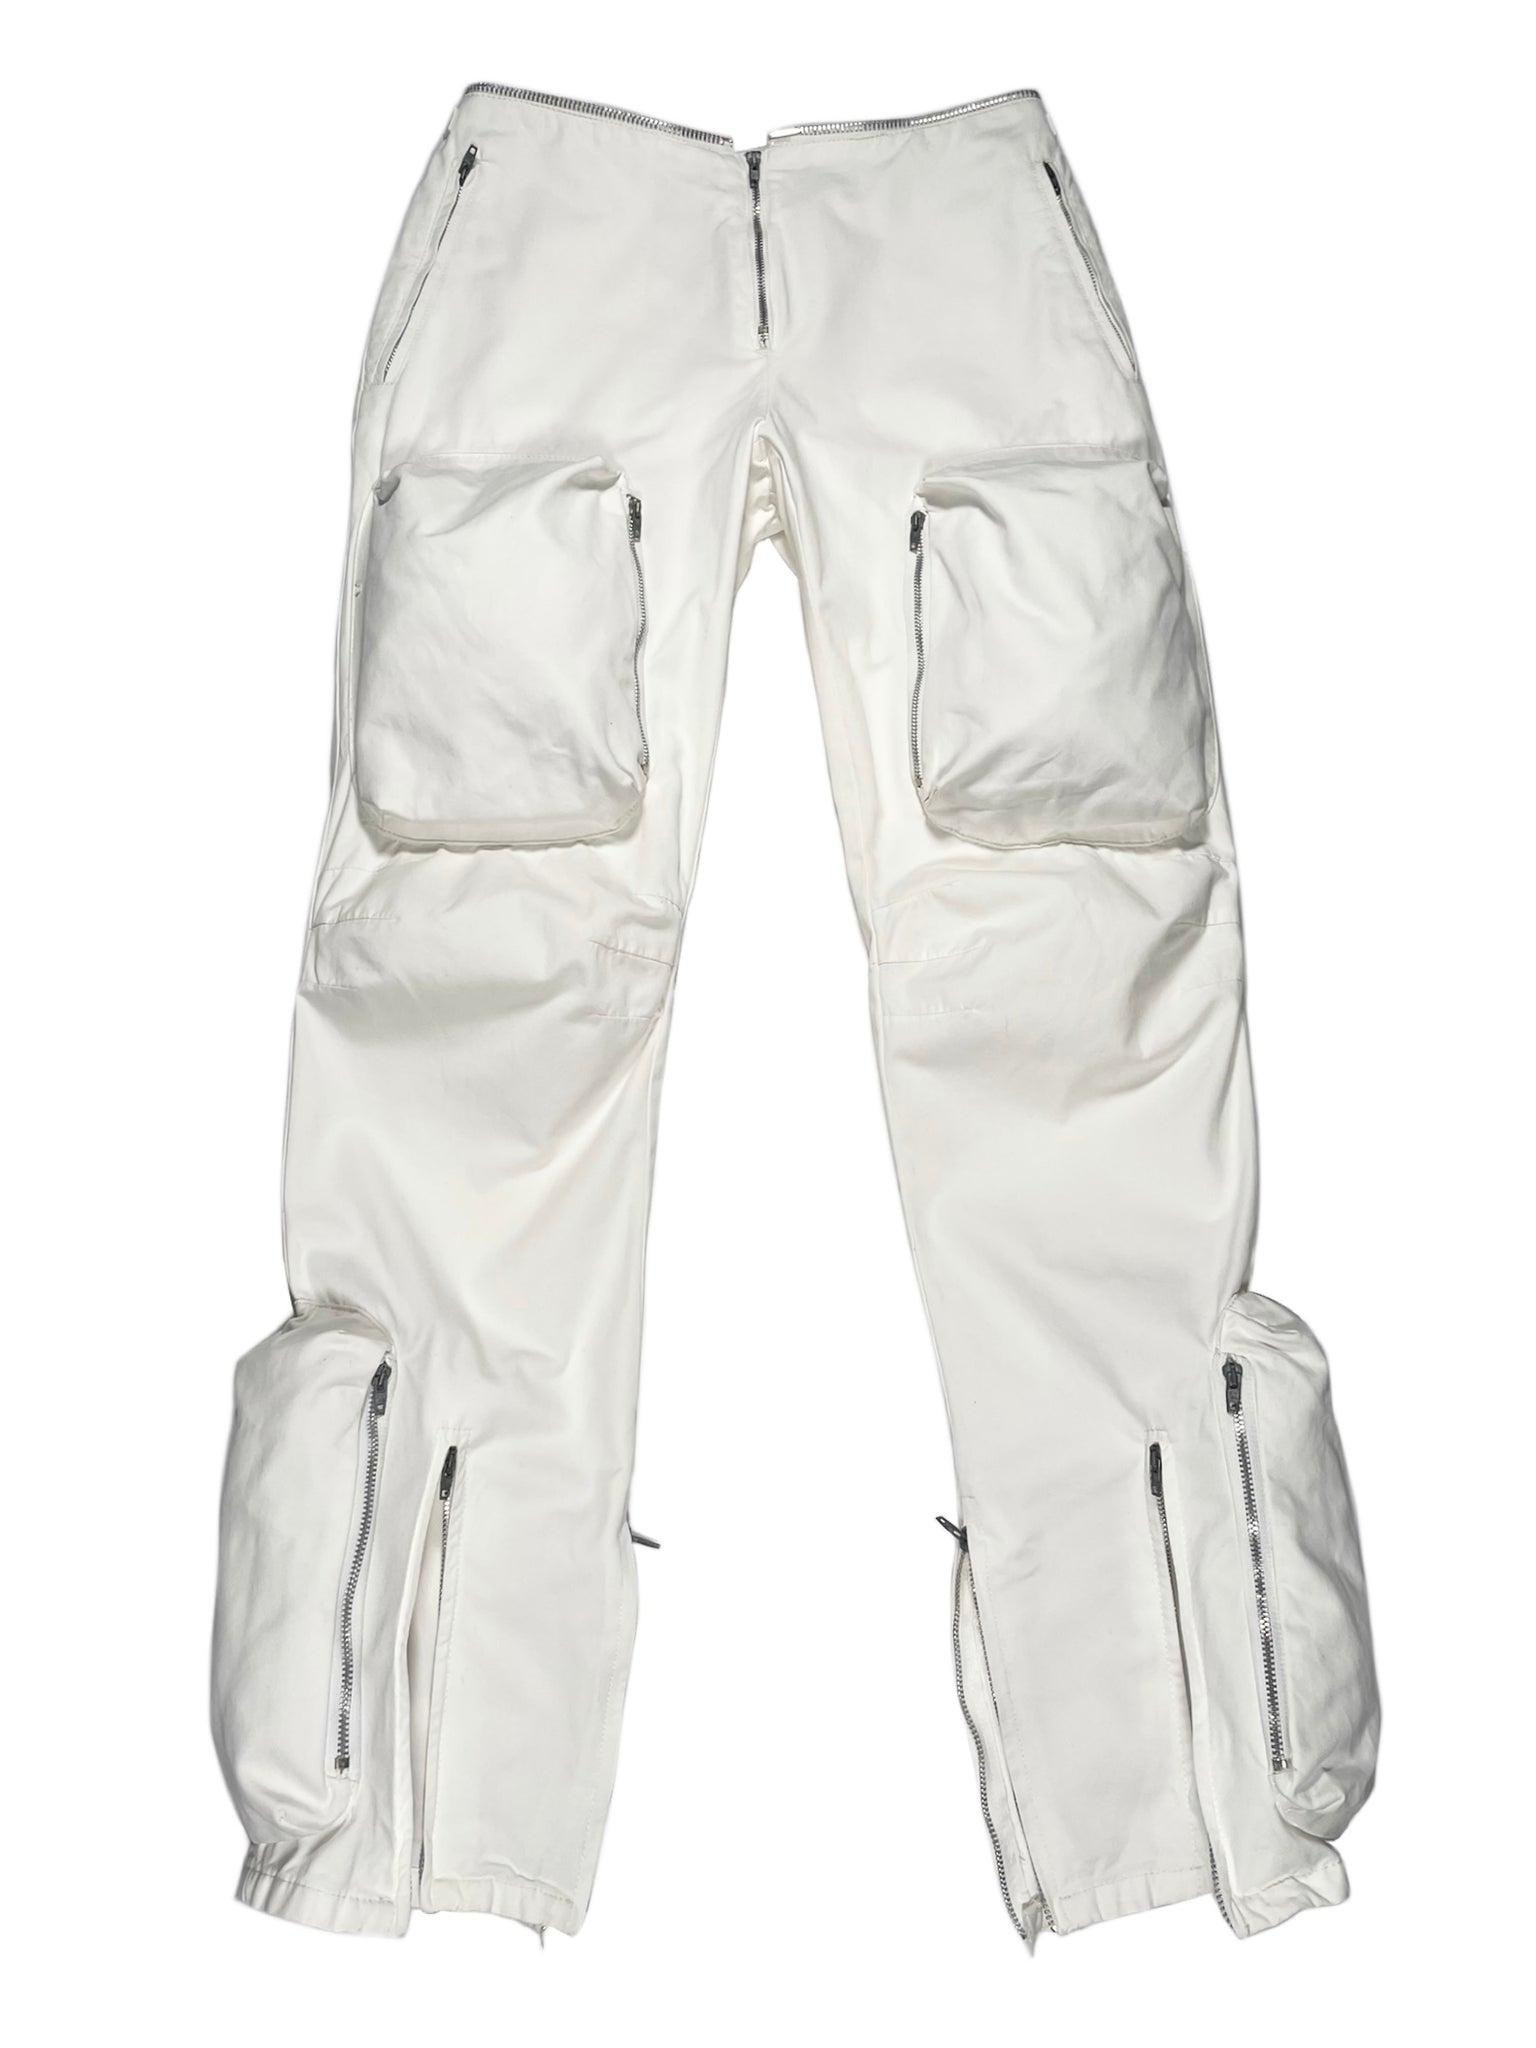 AW1999 Helmut Lang astro cargo pants – elevated archives